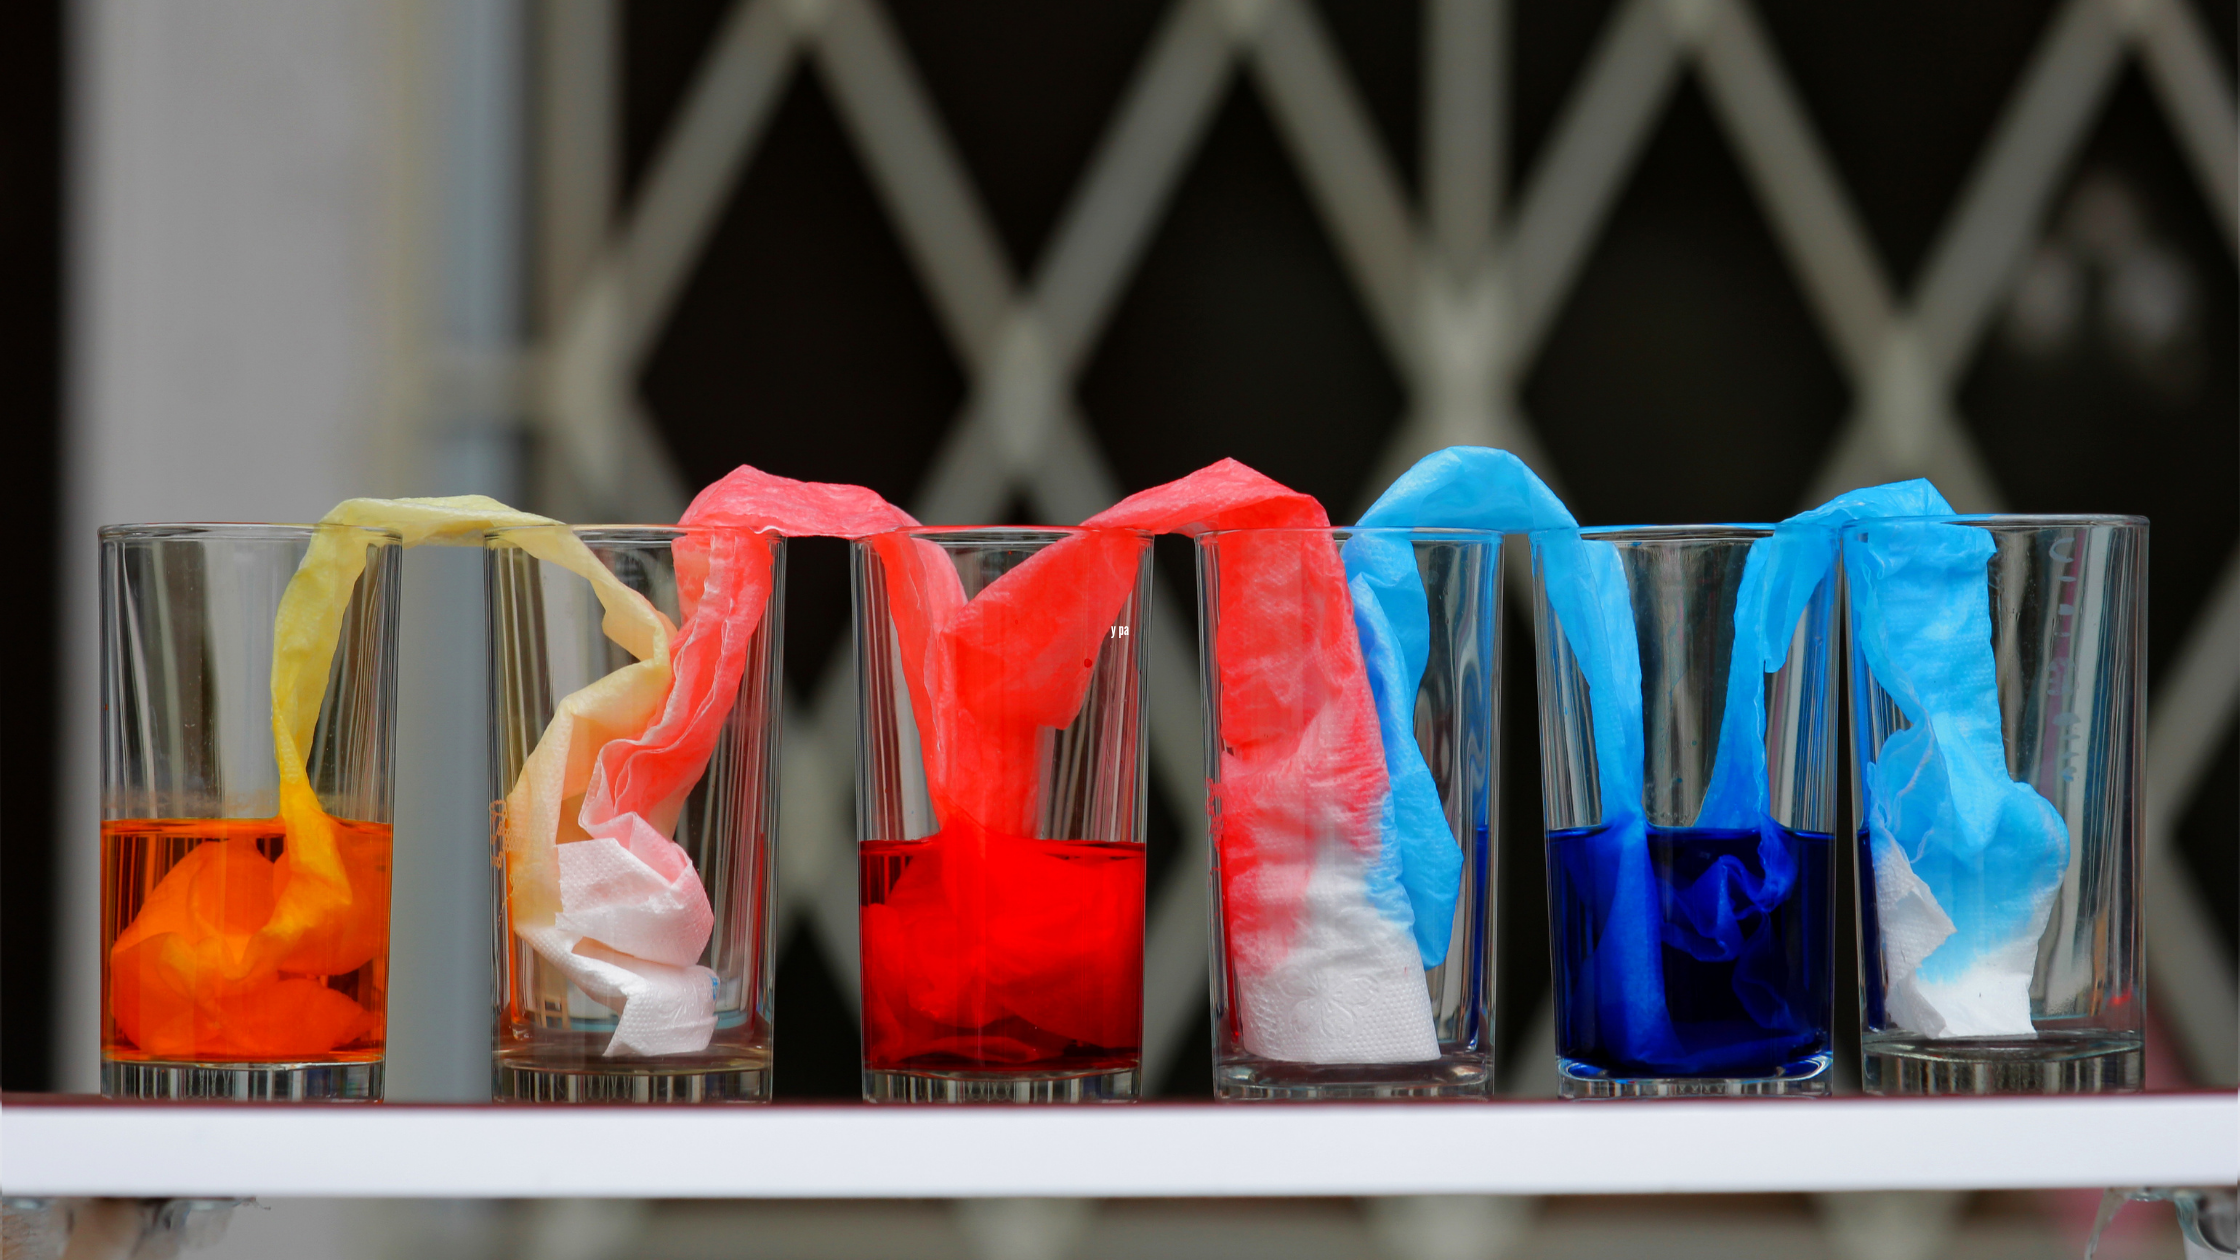 5 Fun & Cool Science Activities with Dye to Do With the Kids 15